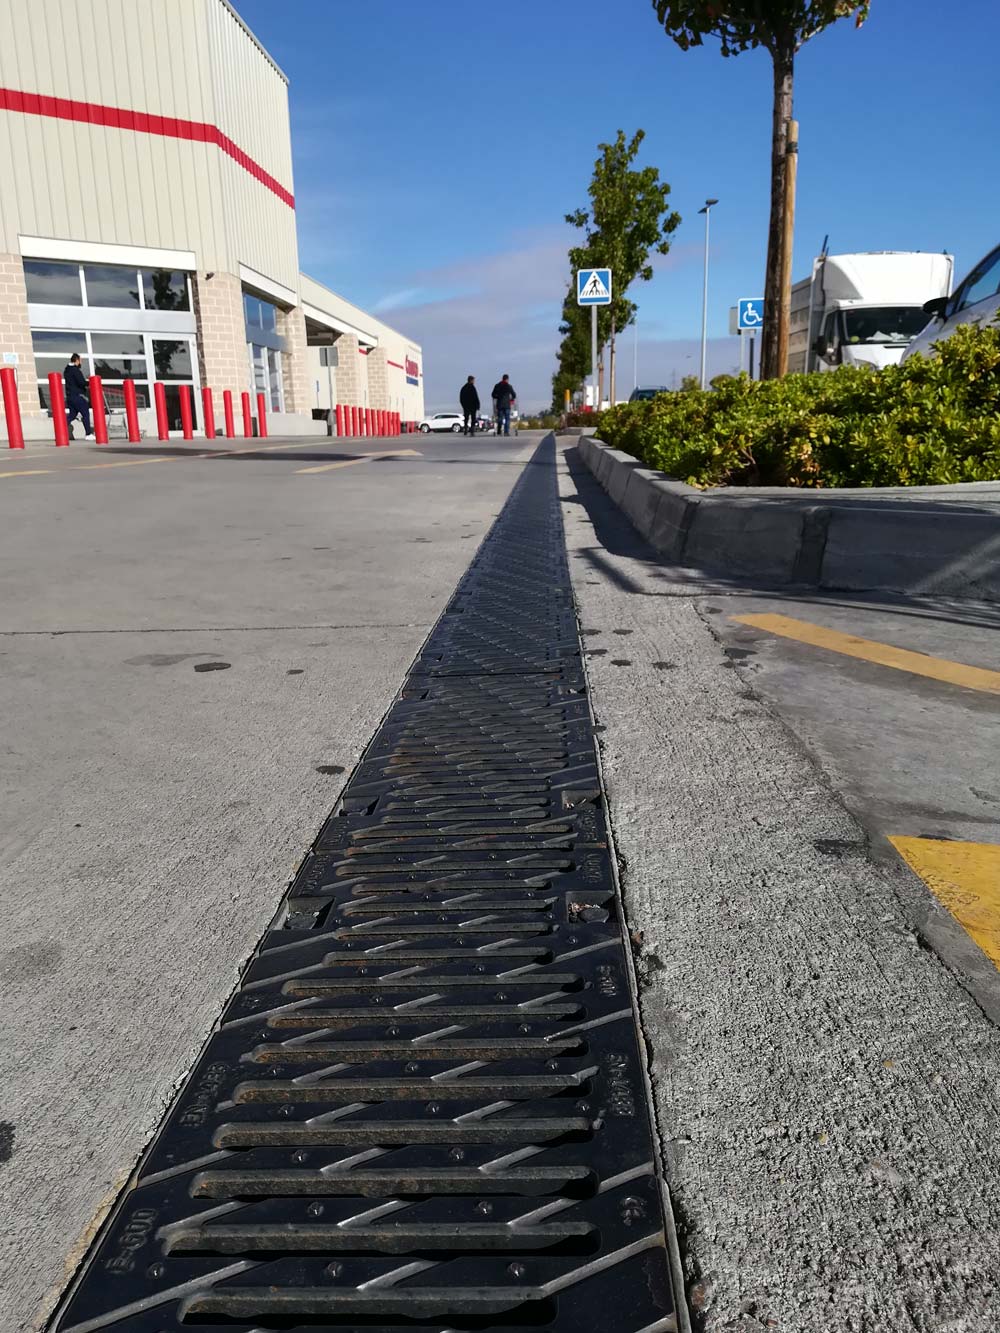 Costco Wholesale opts for ULMA Drainage Channels